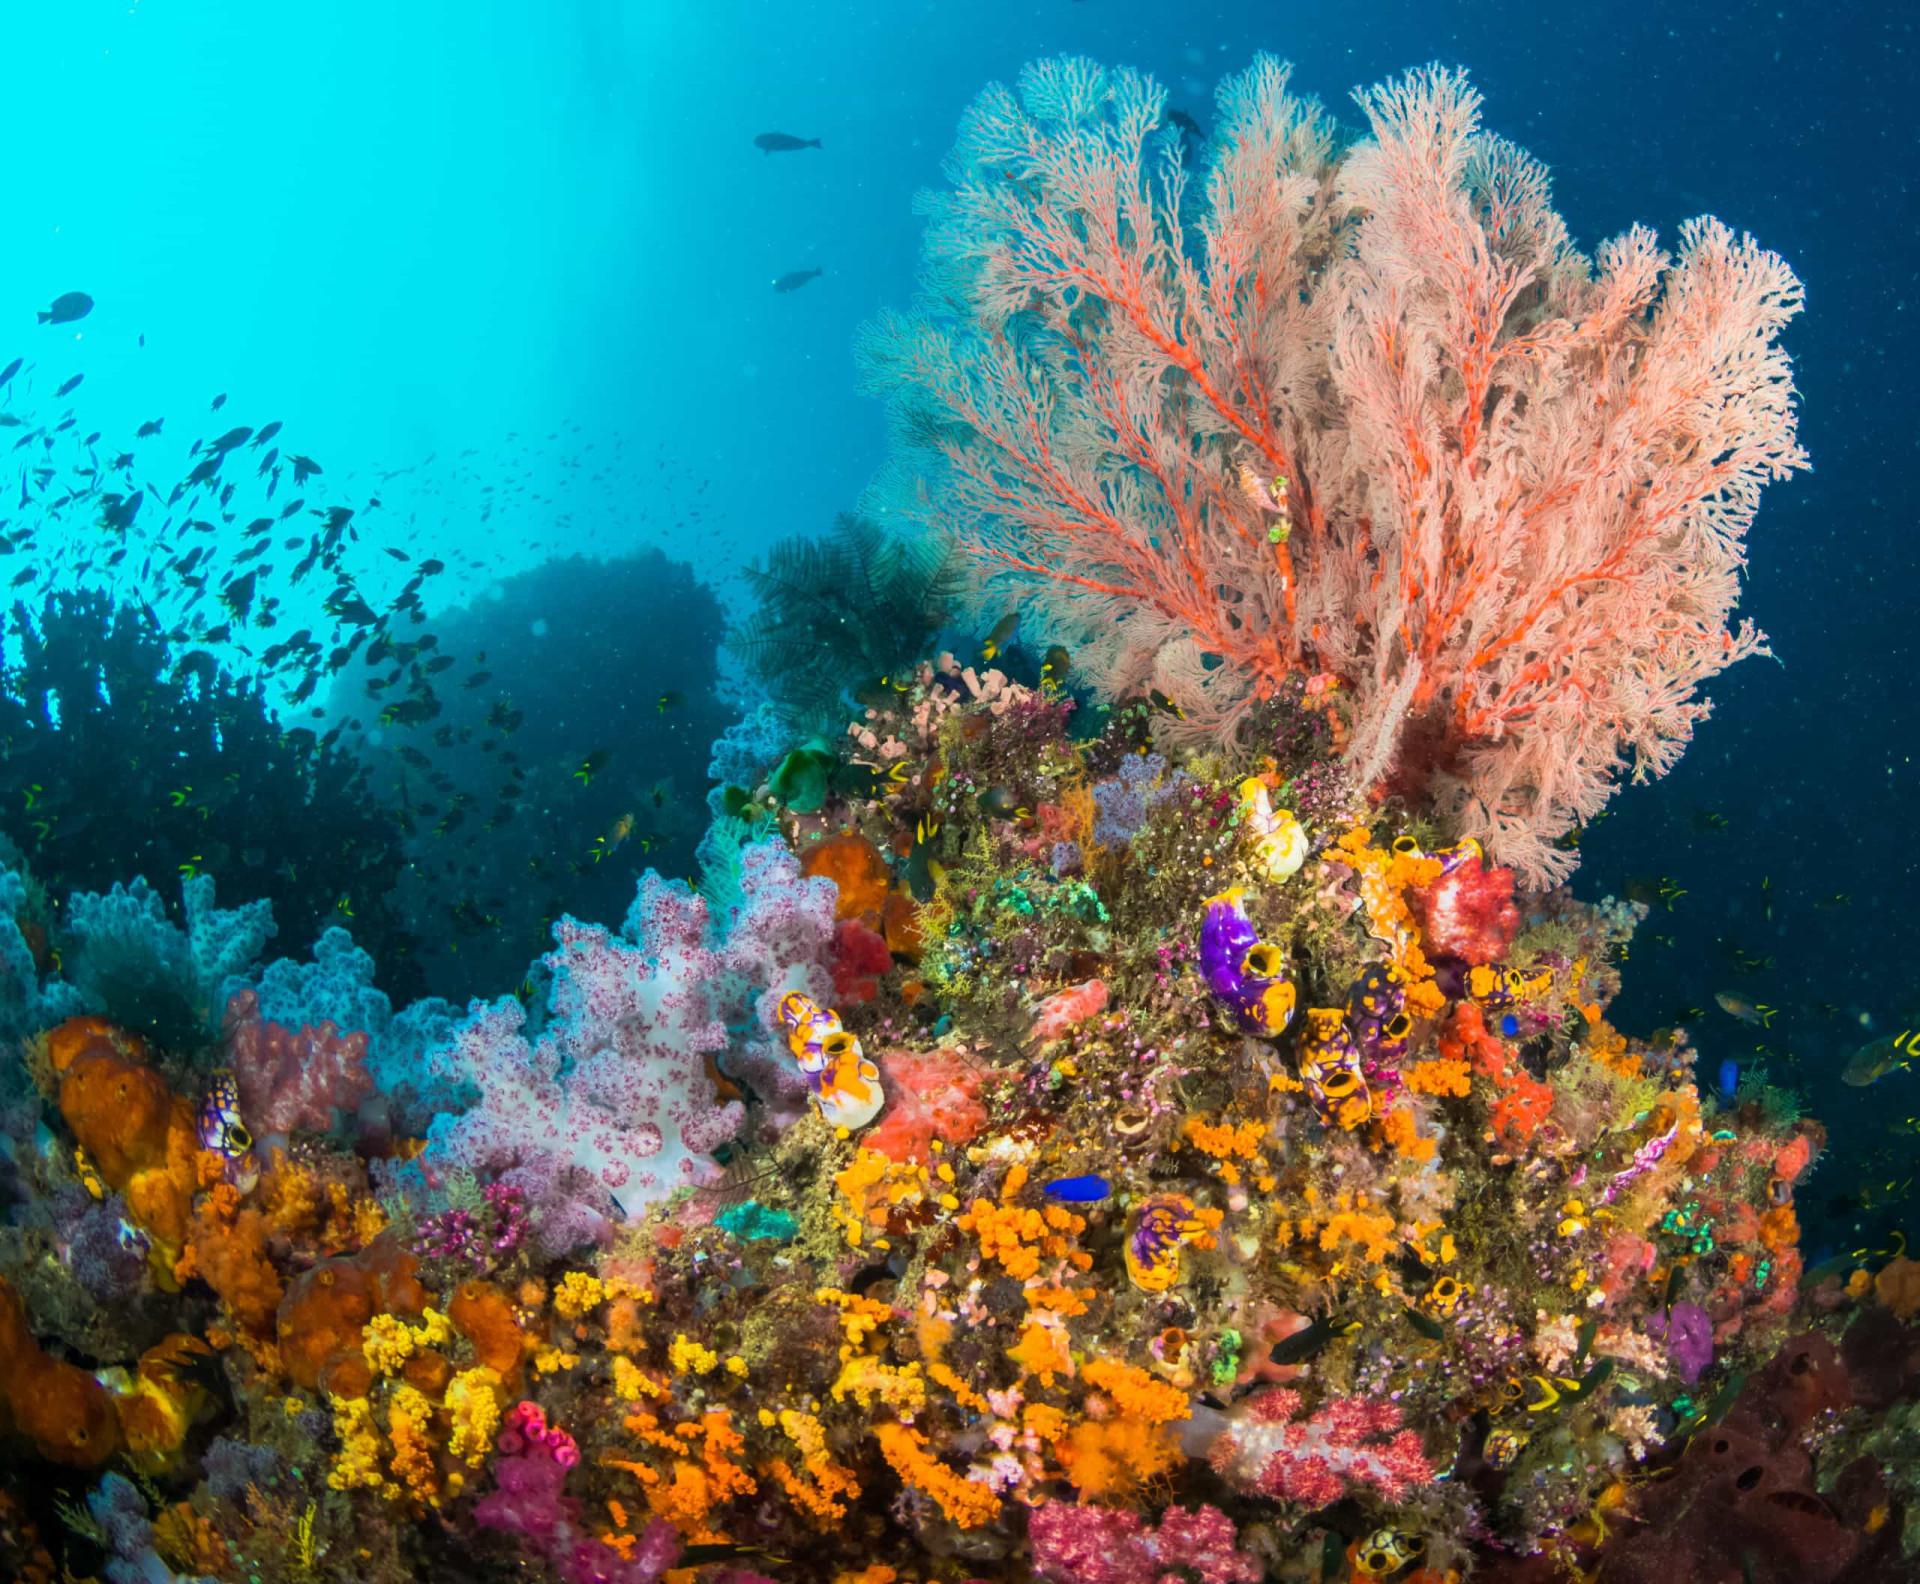 <p>The location of some of the richest marine biodiversity on Earth, the Raja Ampat Islands made headlines in 2017 when a cruise ship ran aground on a reef, destroying a huge swathe of coral. Environmentalists and academics estimate a recovery time for the reef spanning decades.</p><p>You may also like:<a href="https://www.starsinsider.com/n/453074?utm_source=msn.com&utm_medium=display&utm_campaign=referral_description&utm_content=668561en-my"> The biggest hair trends of 2020 as seen on celebs</a></p>